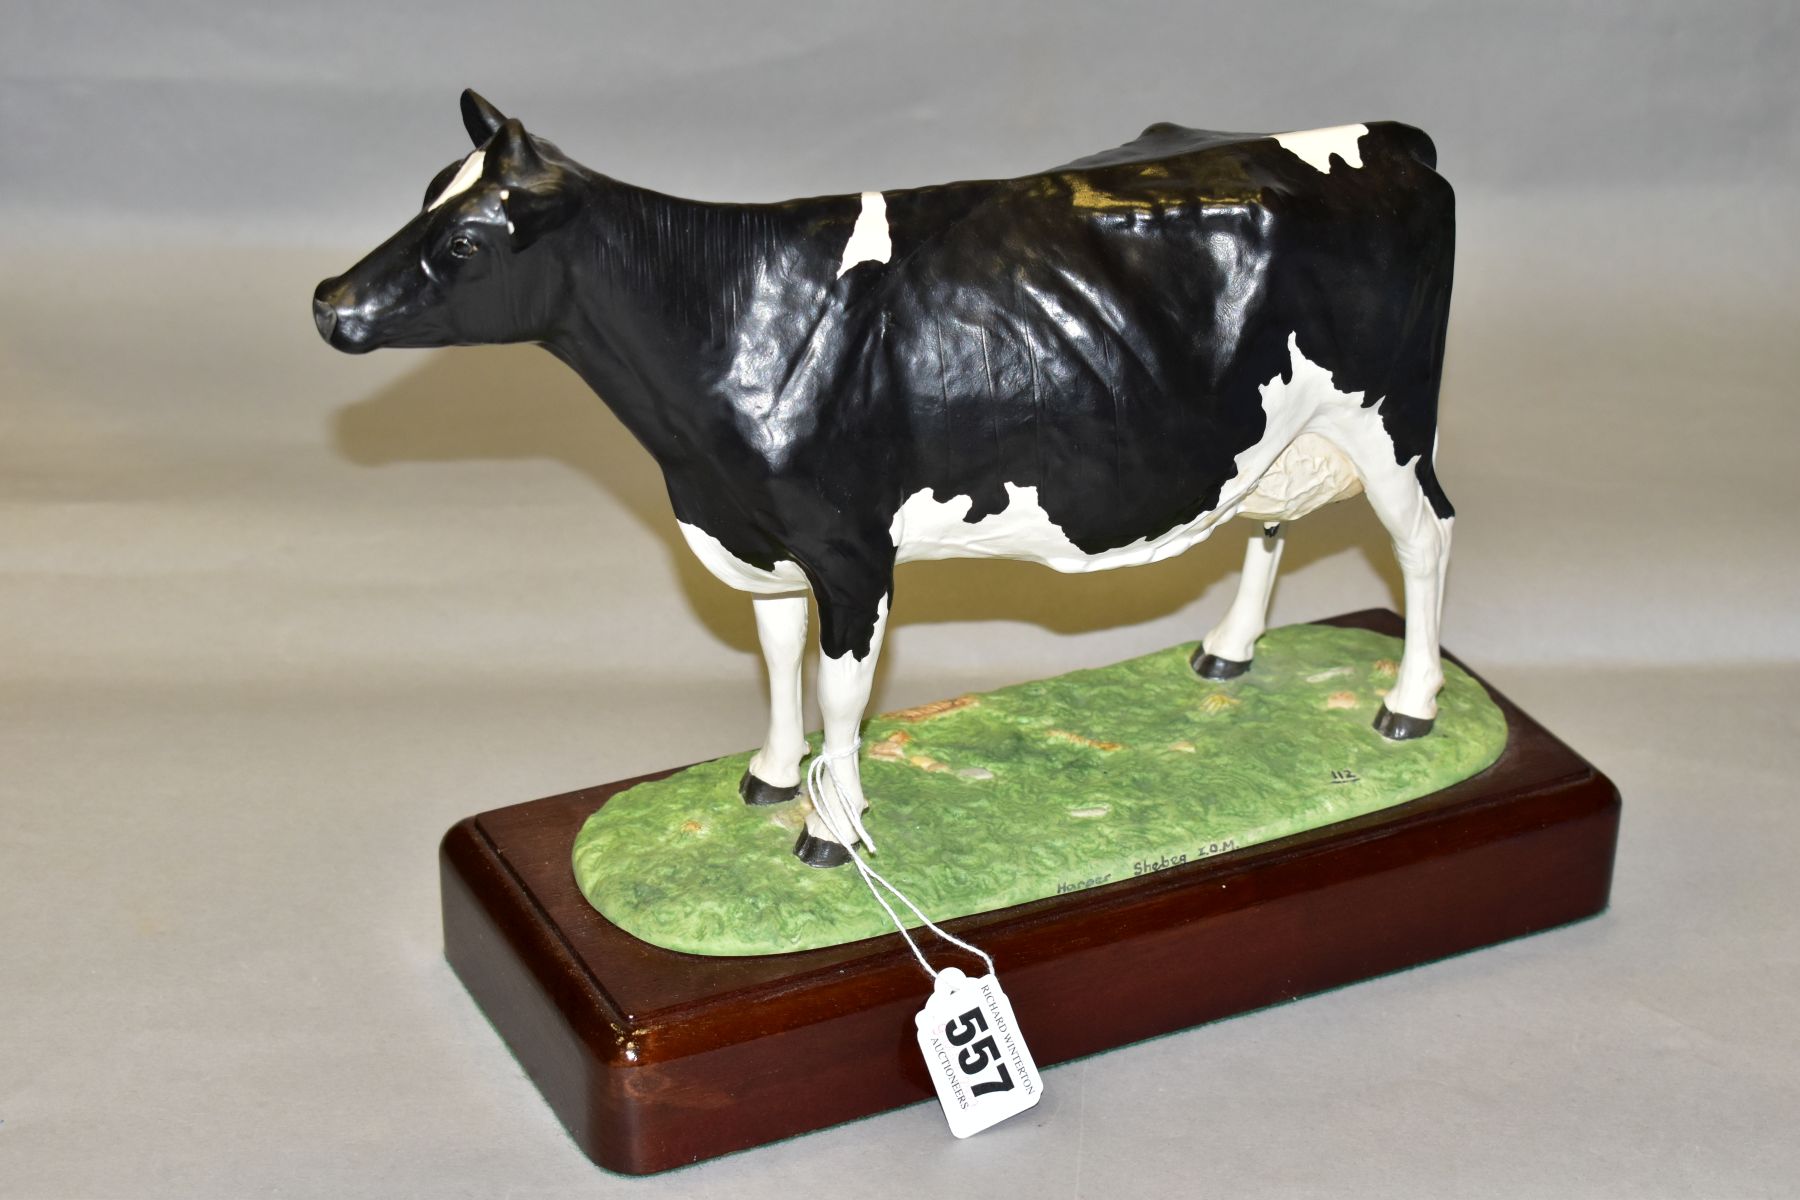 A SHEBEG ISLE OF MAN POTTERY FRESIAN COW, modelled by John Harpur, numbered 112, mounted to a wooden - Image 2 of 4